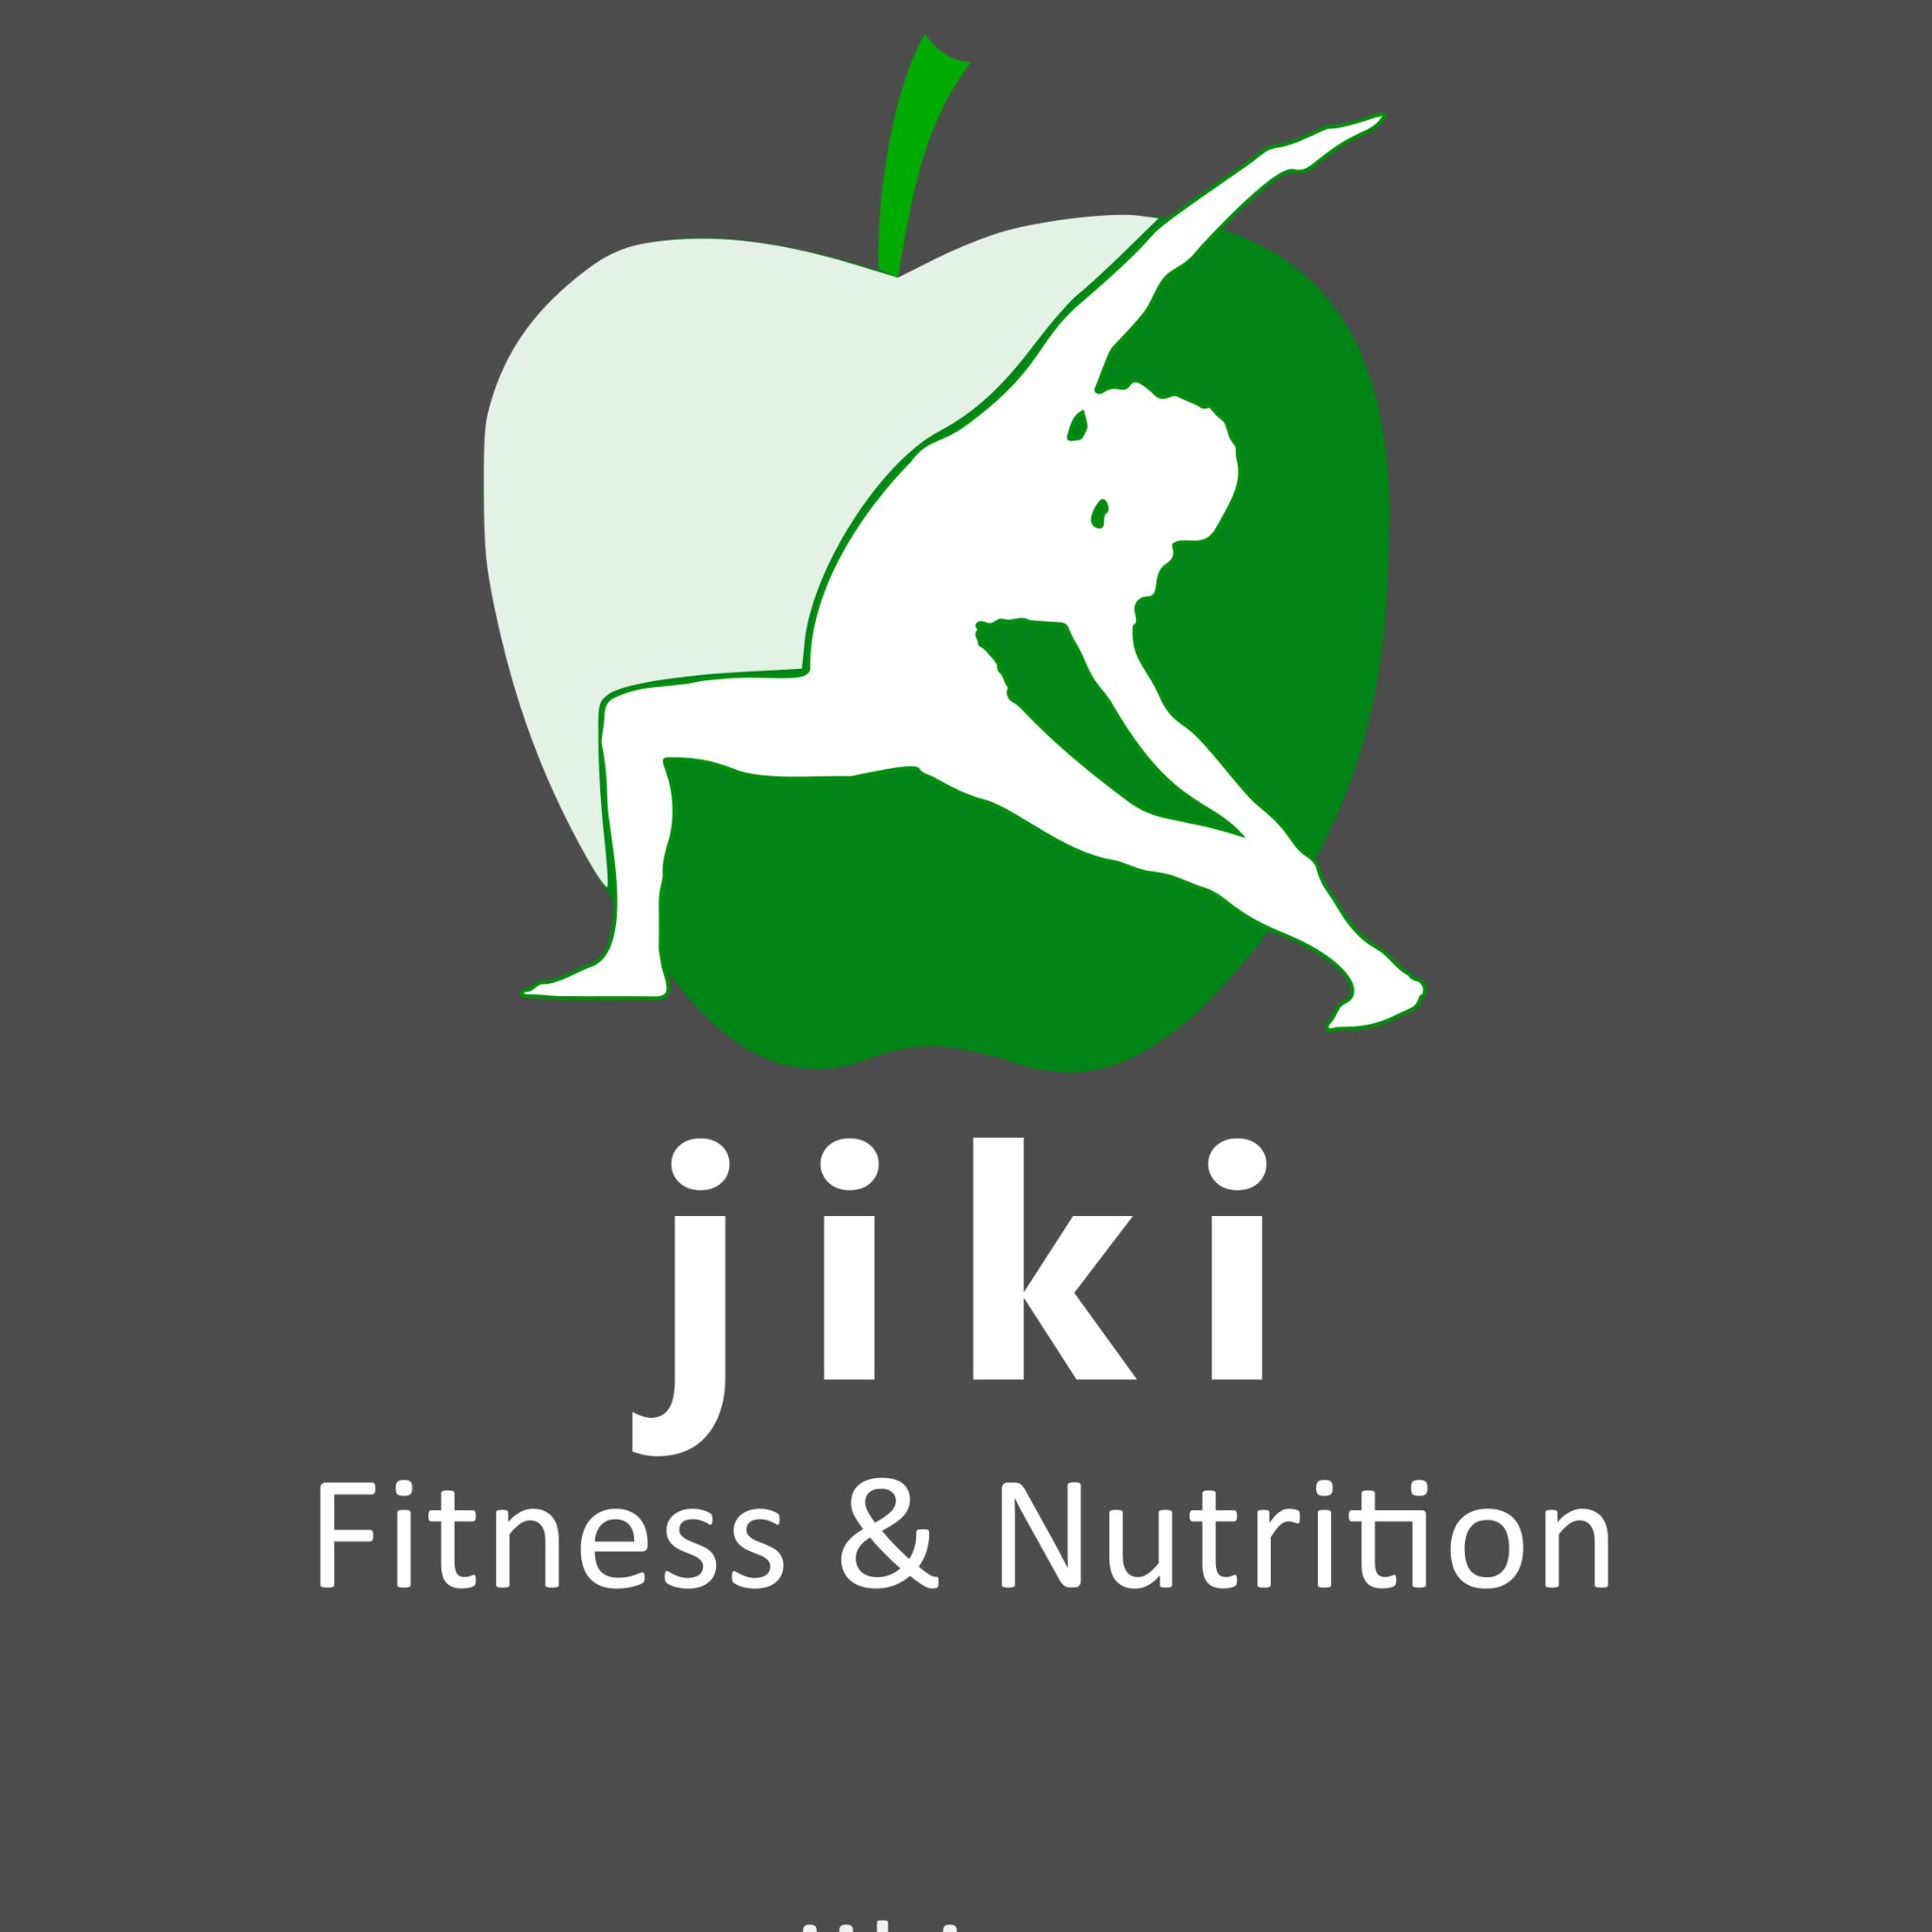 Jiki #Fitness & #Nutrition delivers info on #gyms, #swimmingpools, #spas, #foodsupplements, #physicaltraining techniques in Nigeria. Get your #Jiki Up.